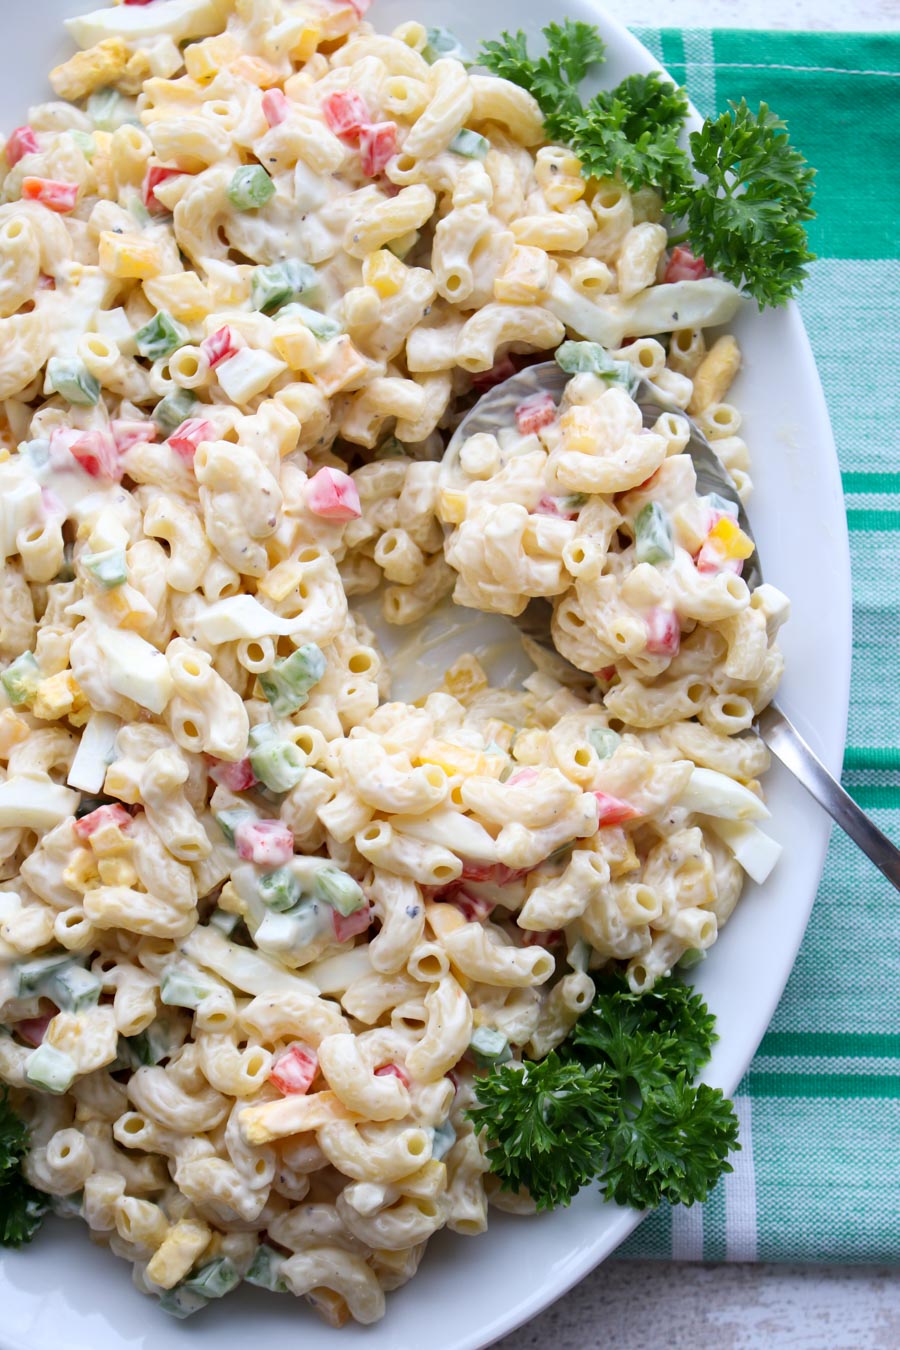 Platter of macaroni salad with a spoon